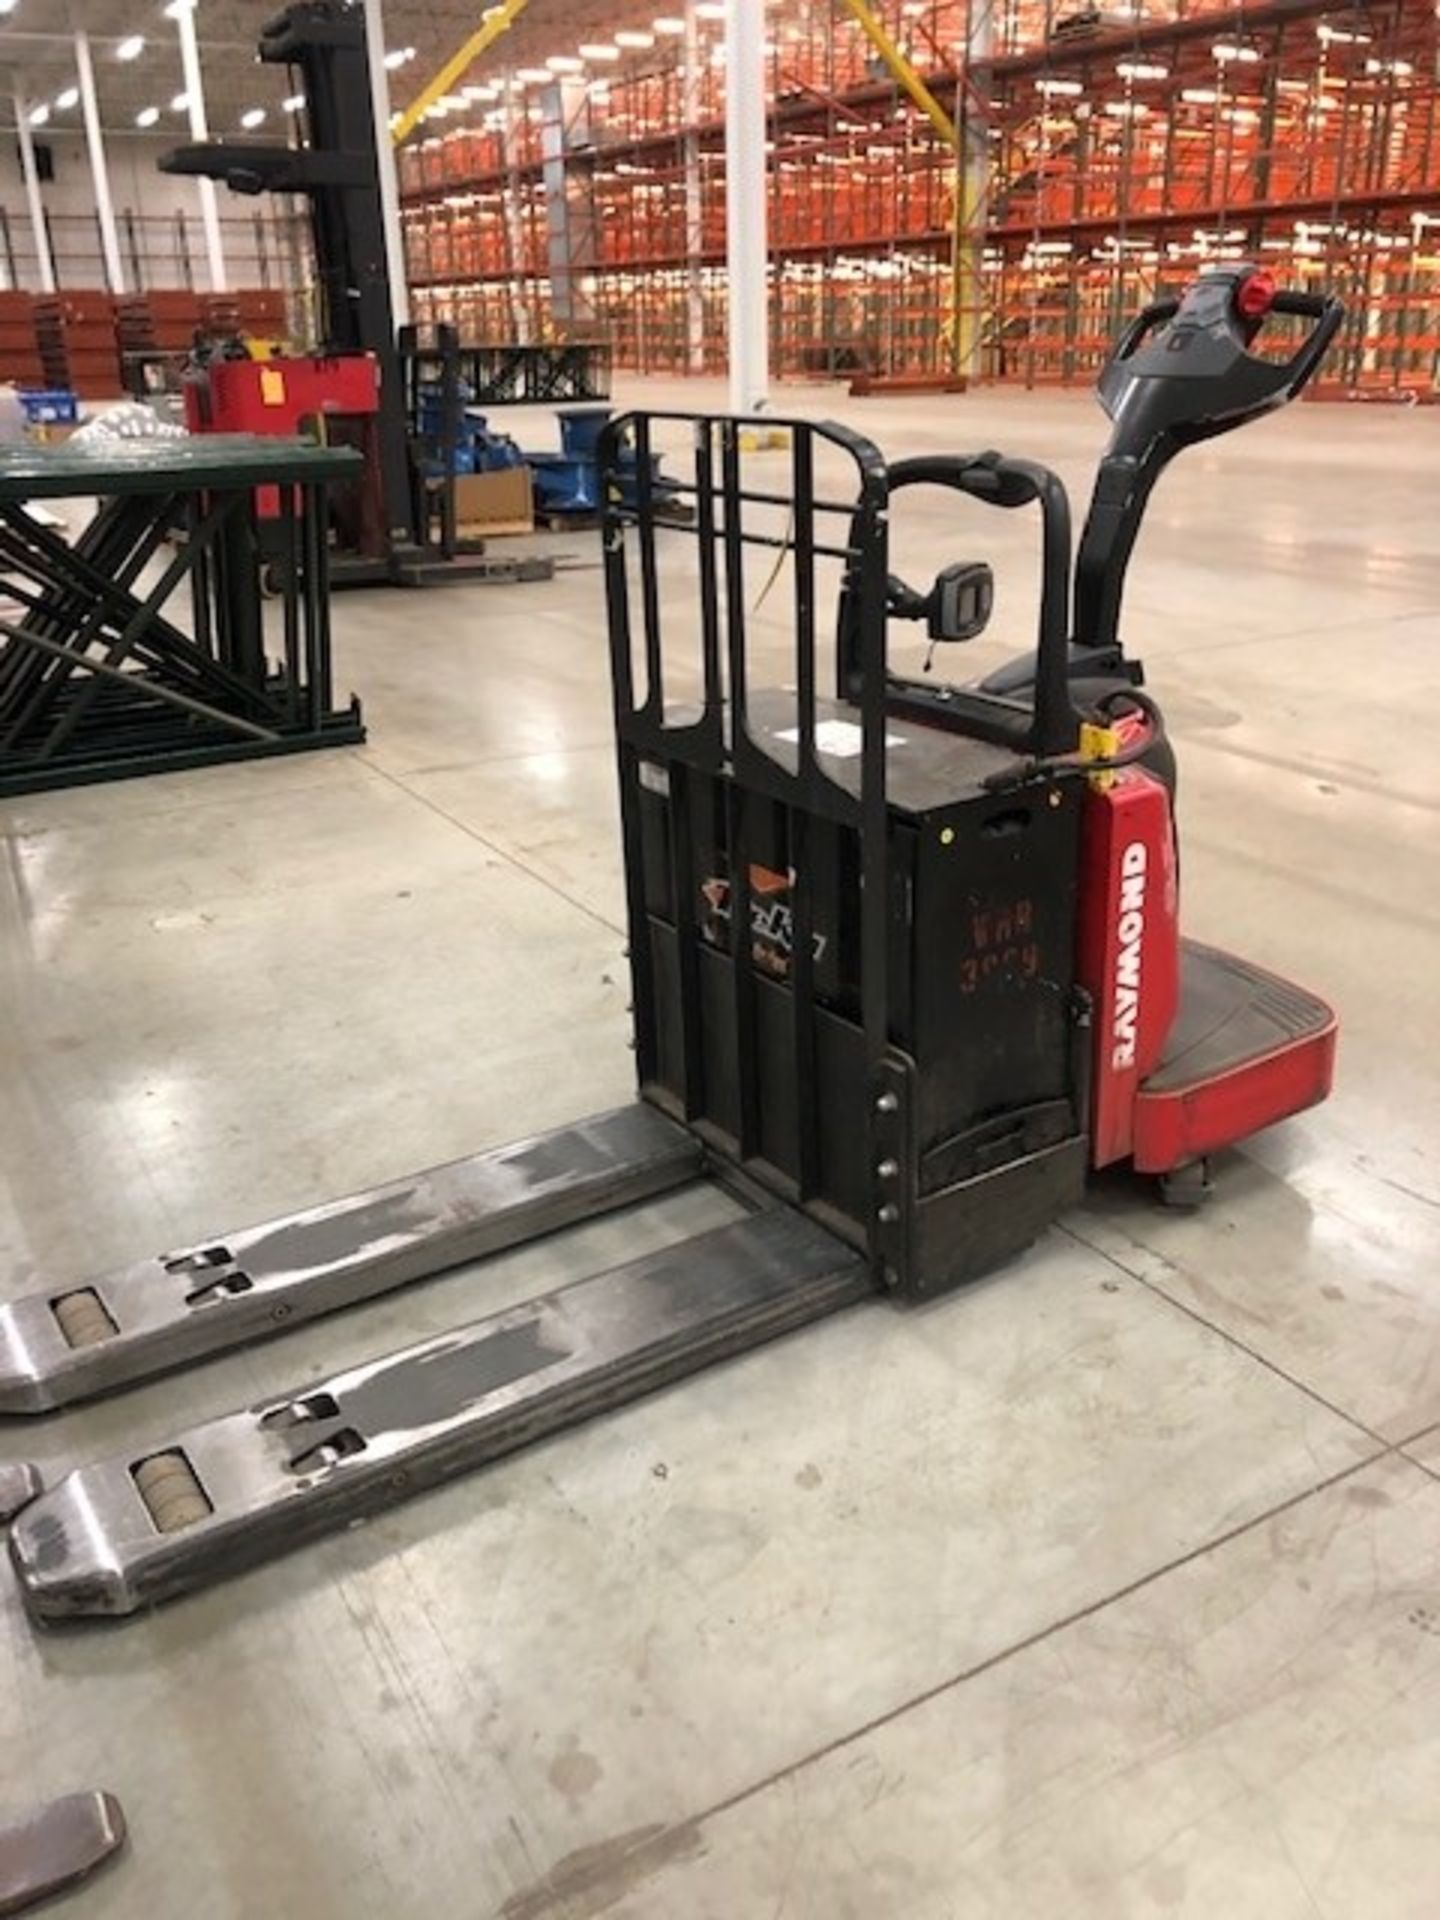 2013 RAYMOND 6,000 LB. CAPACITY ELECTRIC PALLET TRUCK; MODEL 8410, S/N 841-13-17109, WITH IWAREHOUSE - Image 6 of 8